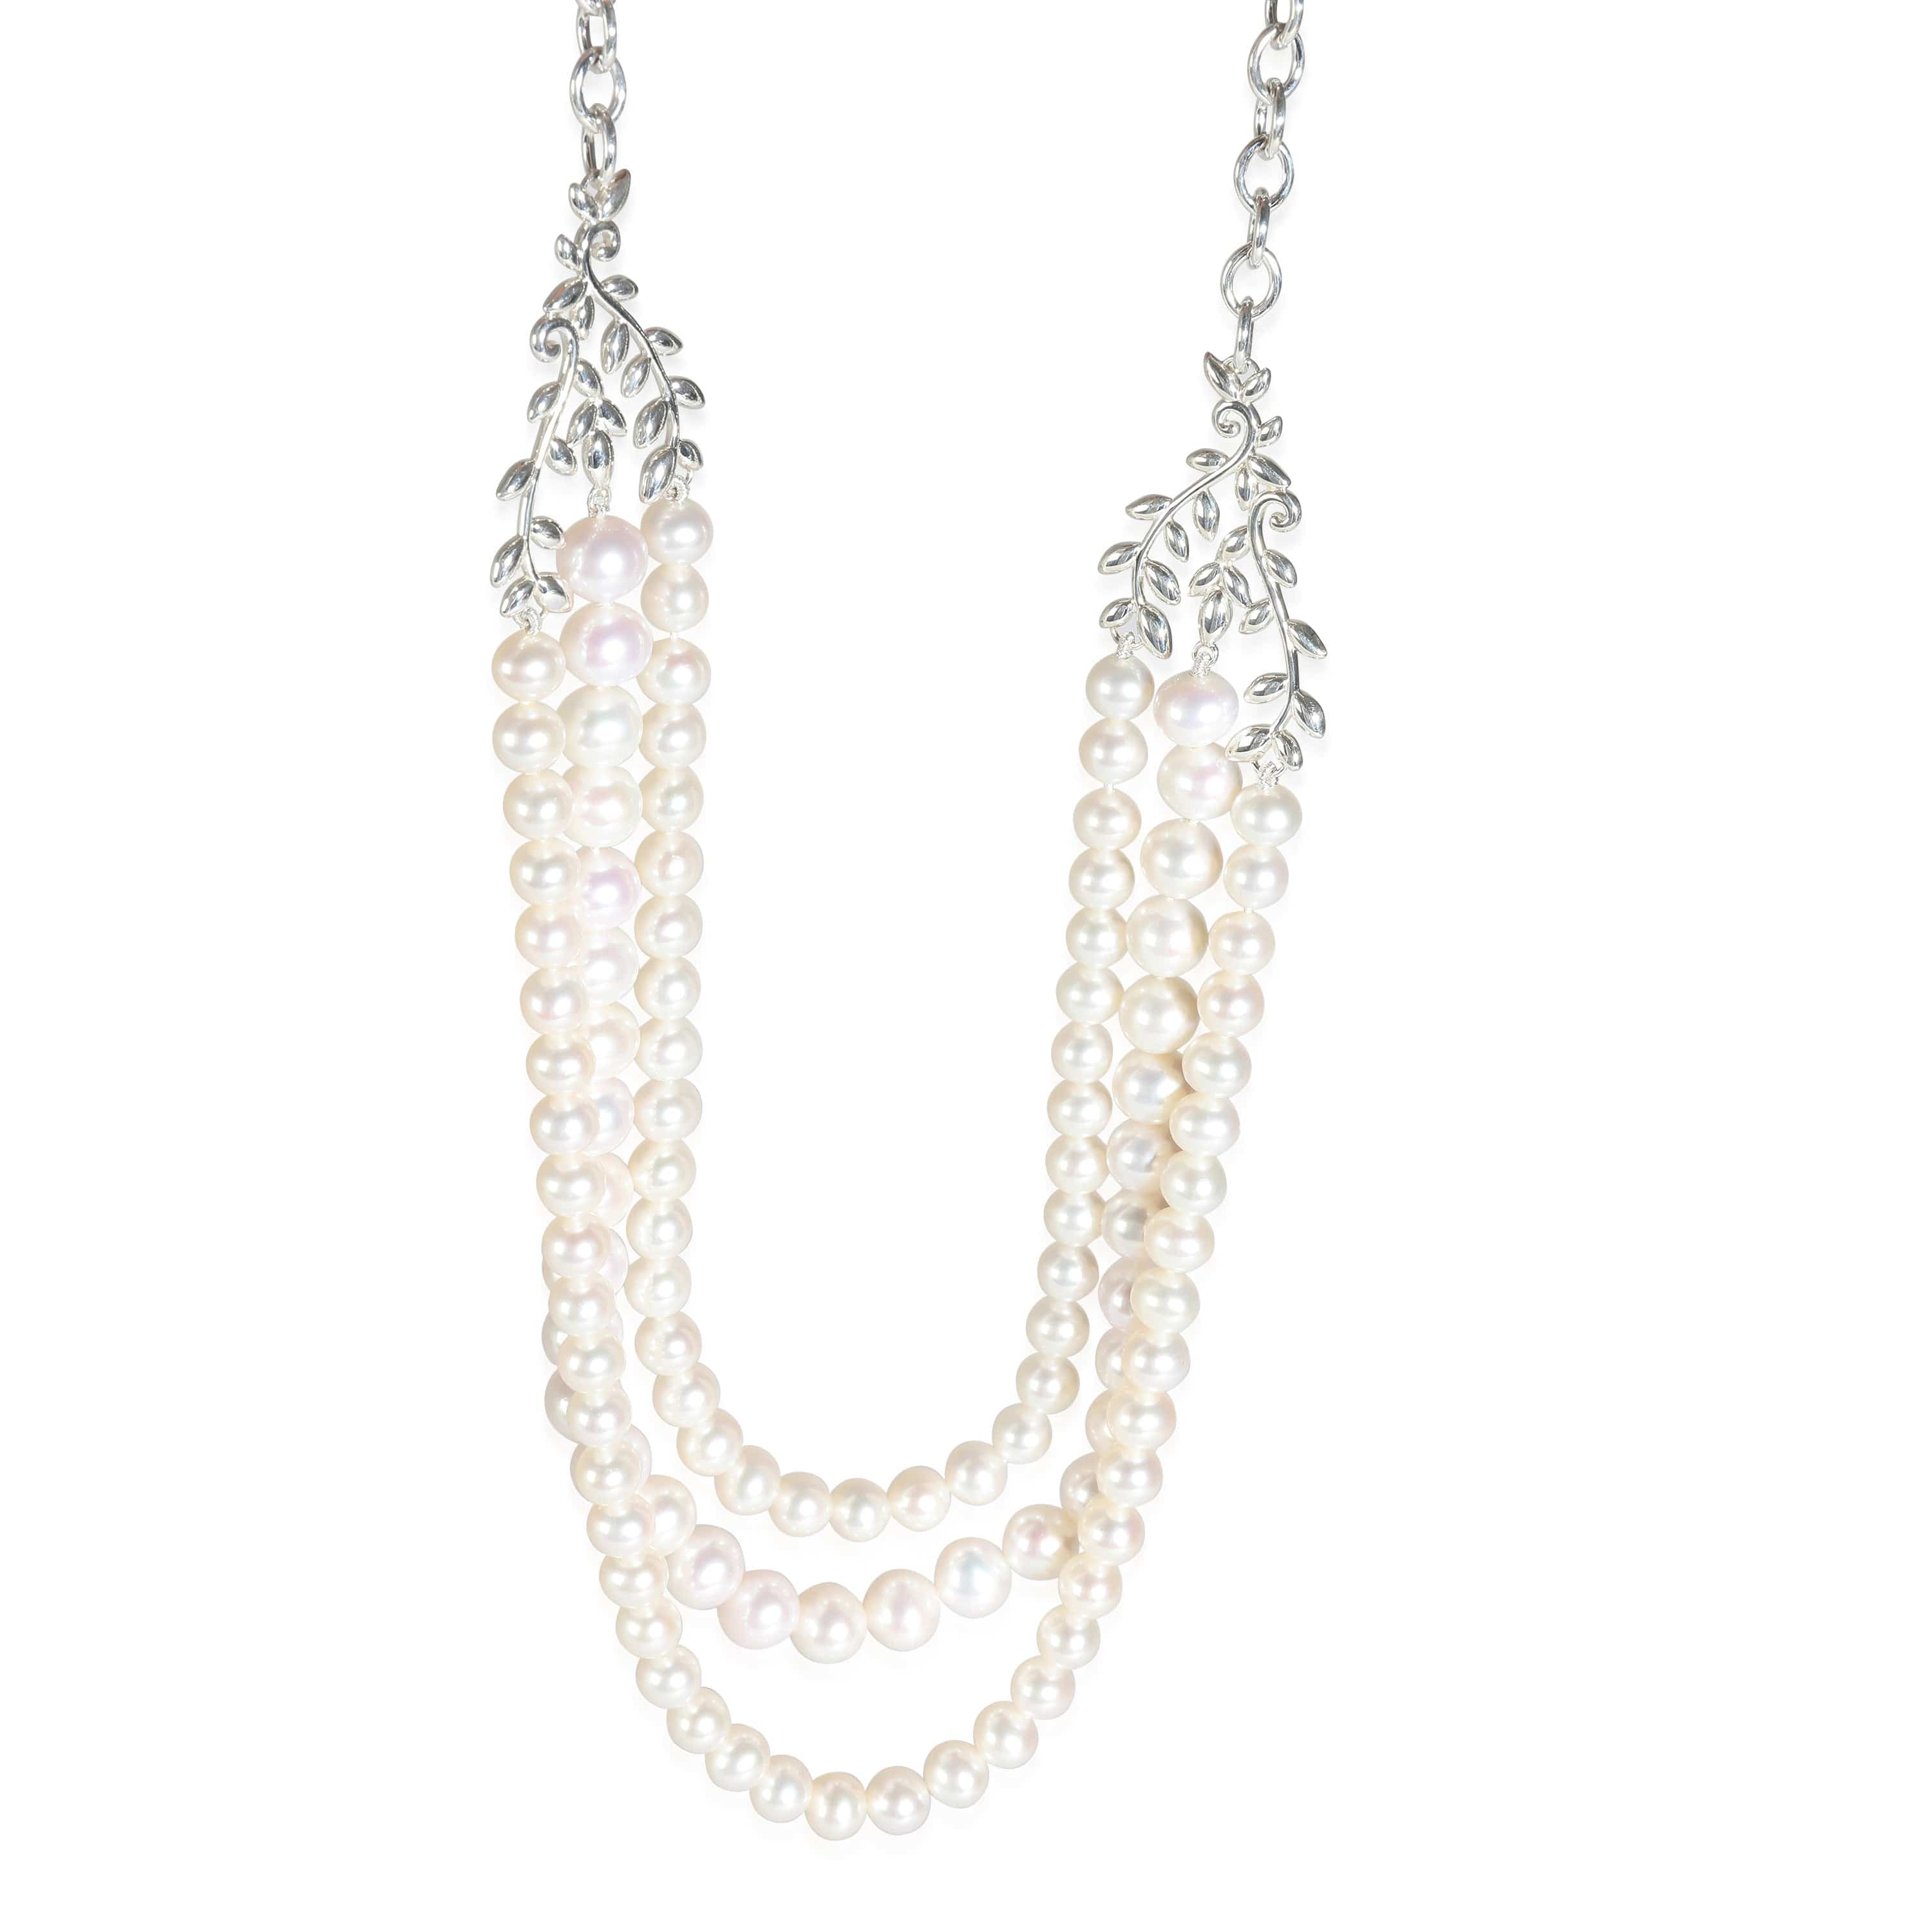 Tiffany & Co. Tiffany & Co. Paloma Picasso Pearl Necklace in  Sterling Silver